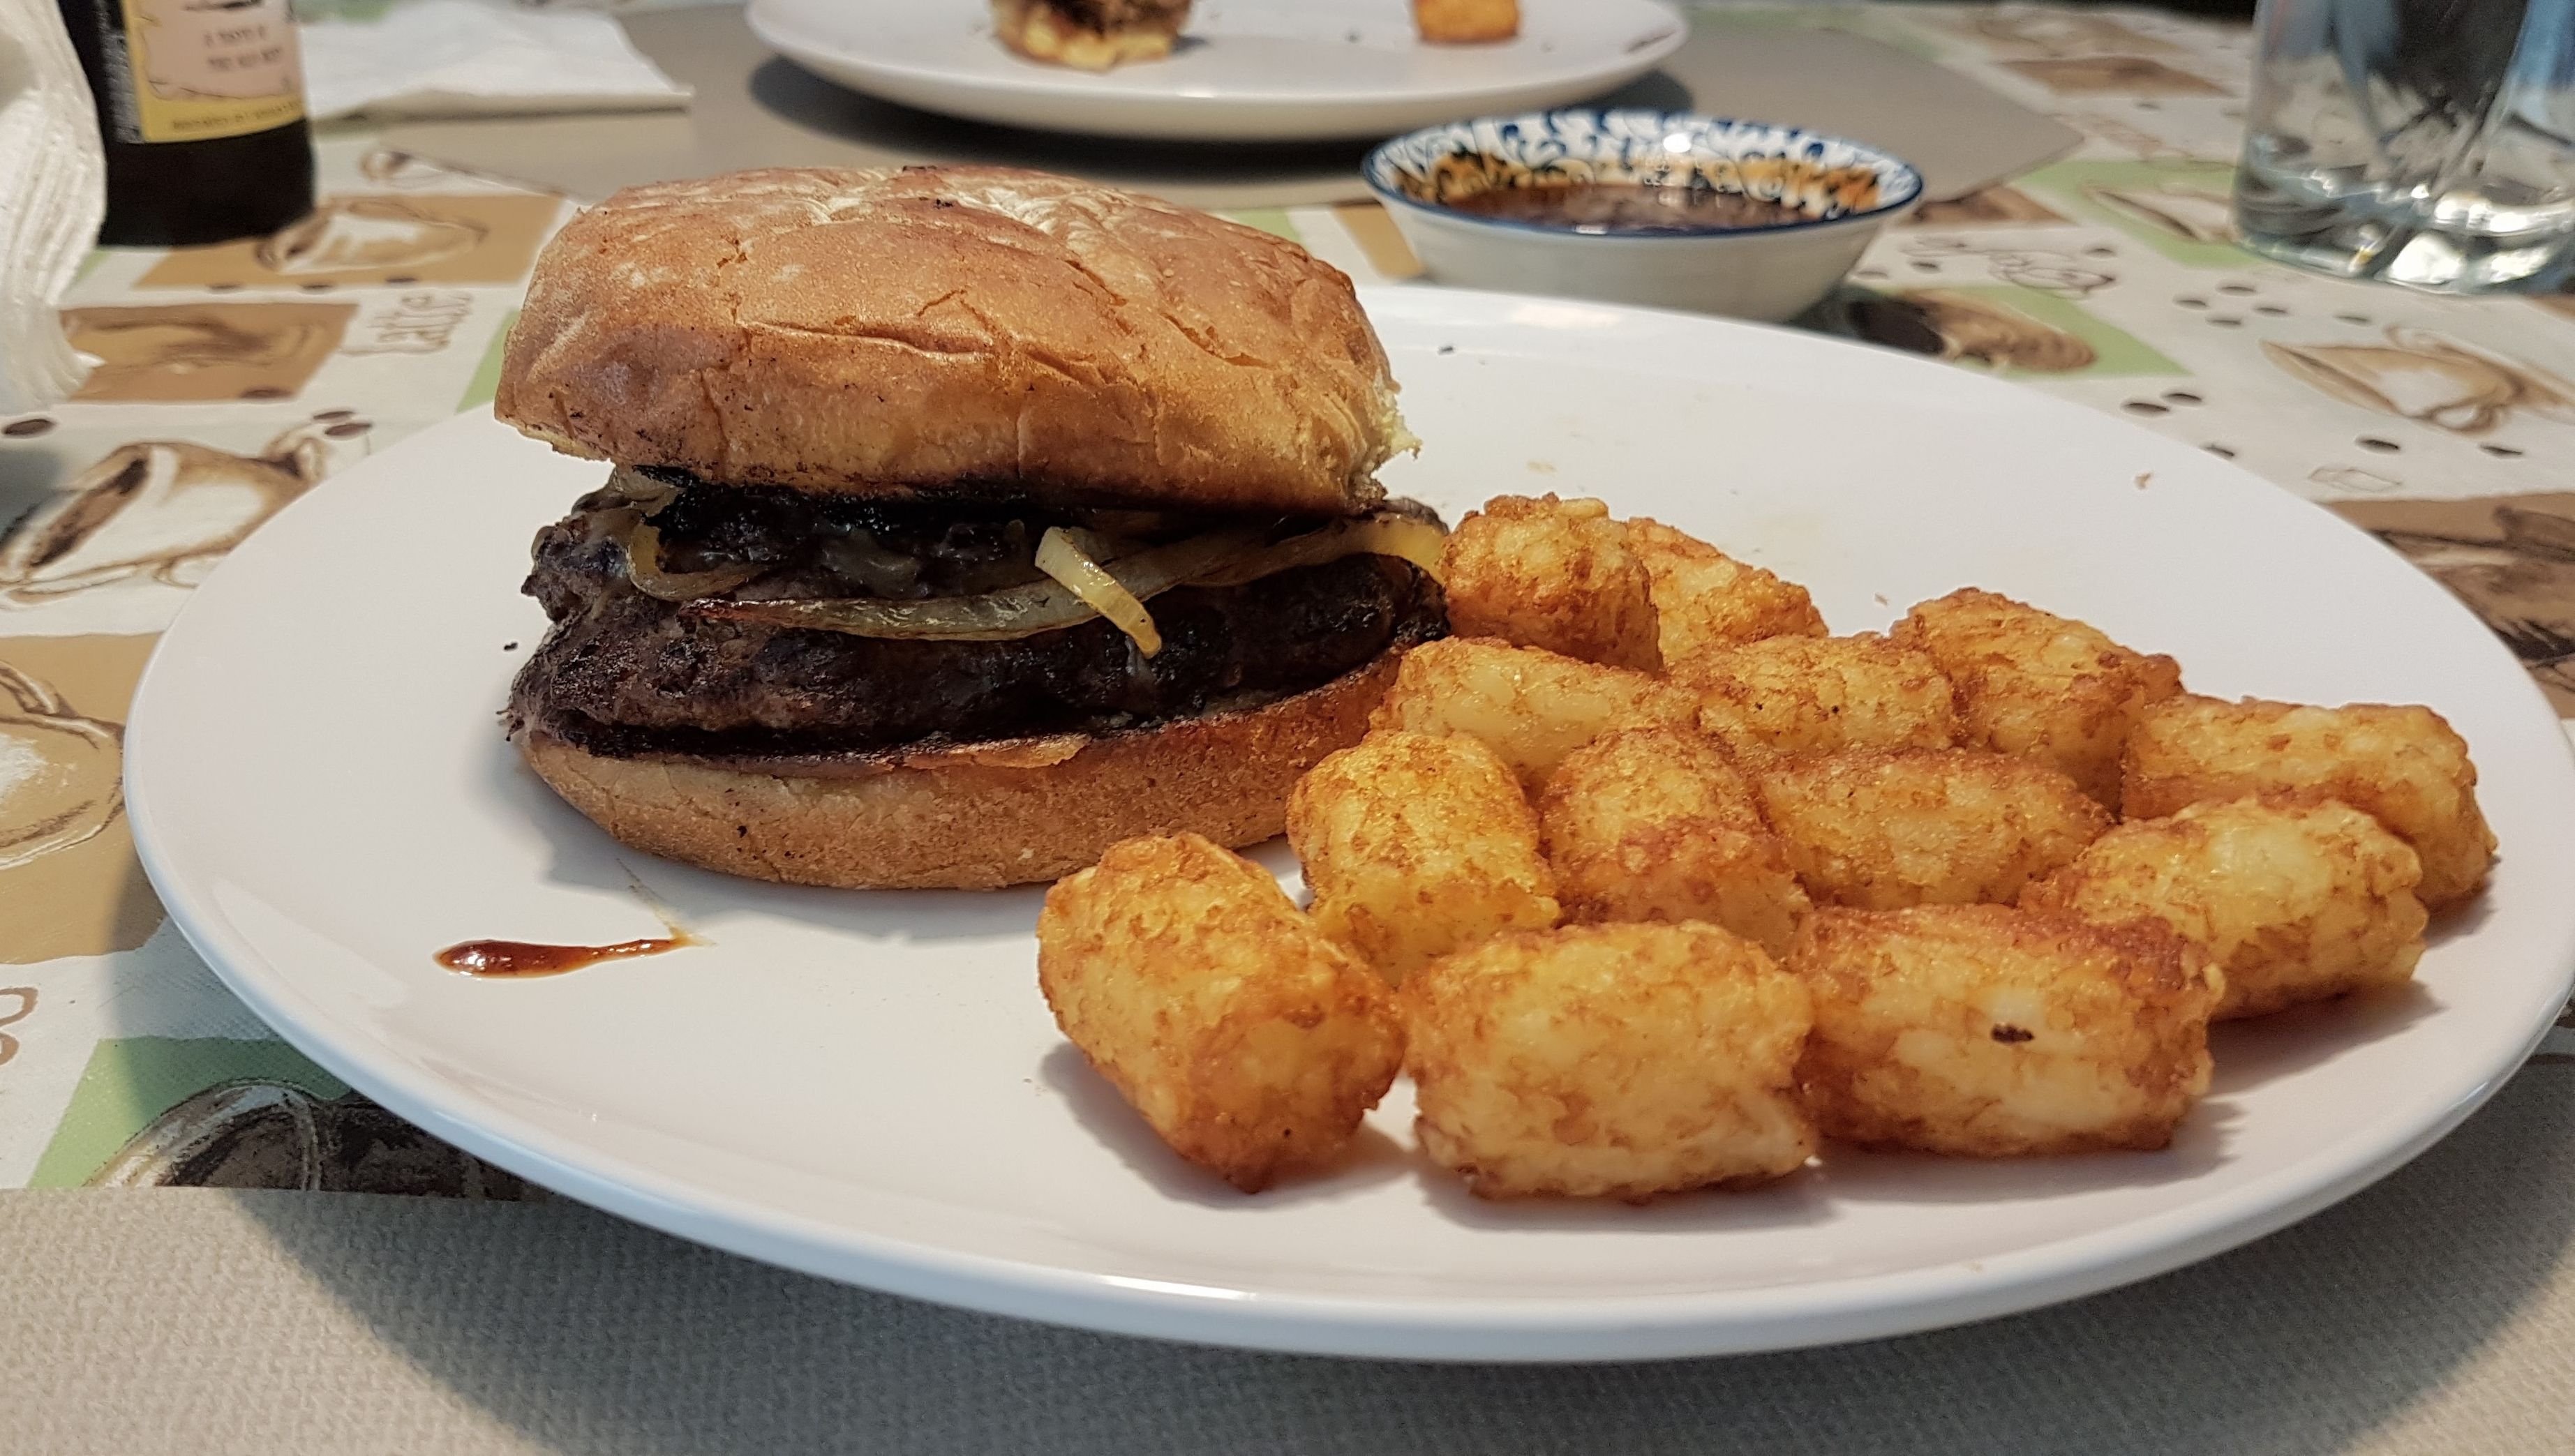 Barbecue burger with tater tots.